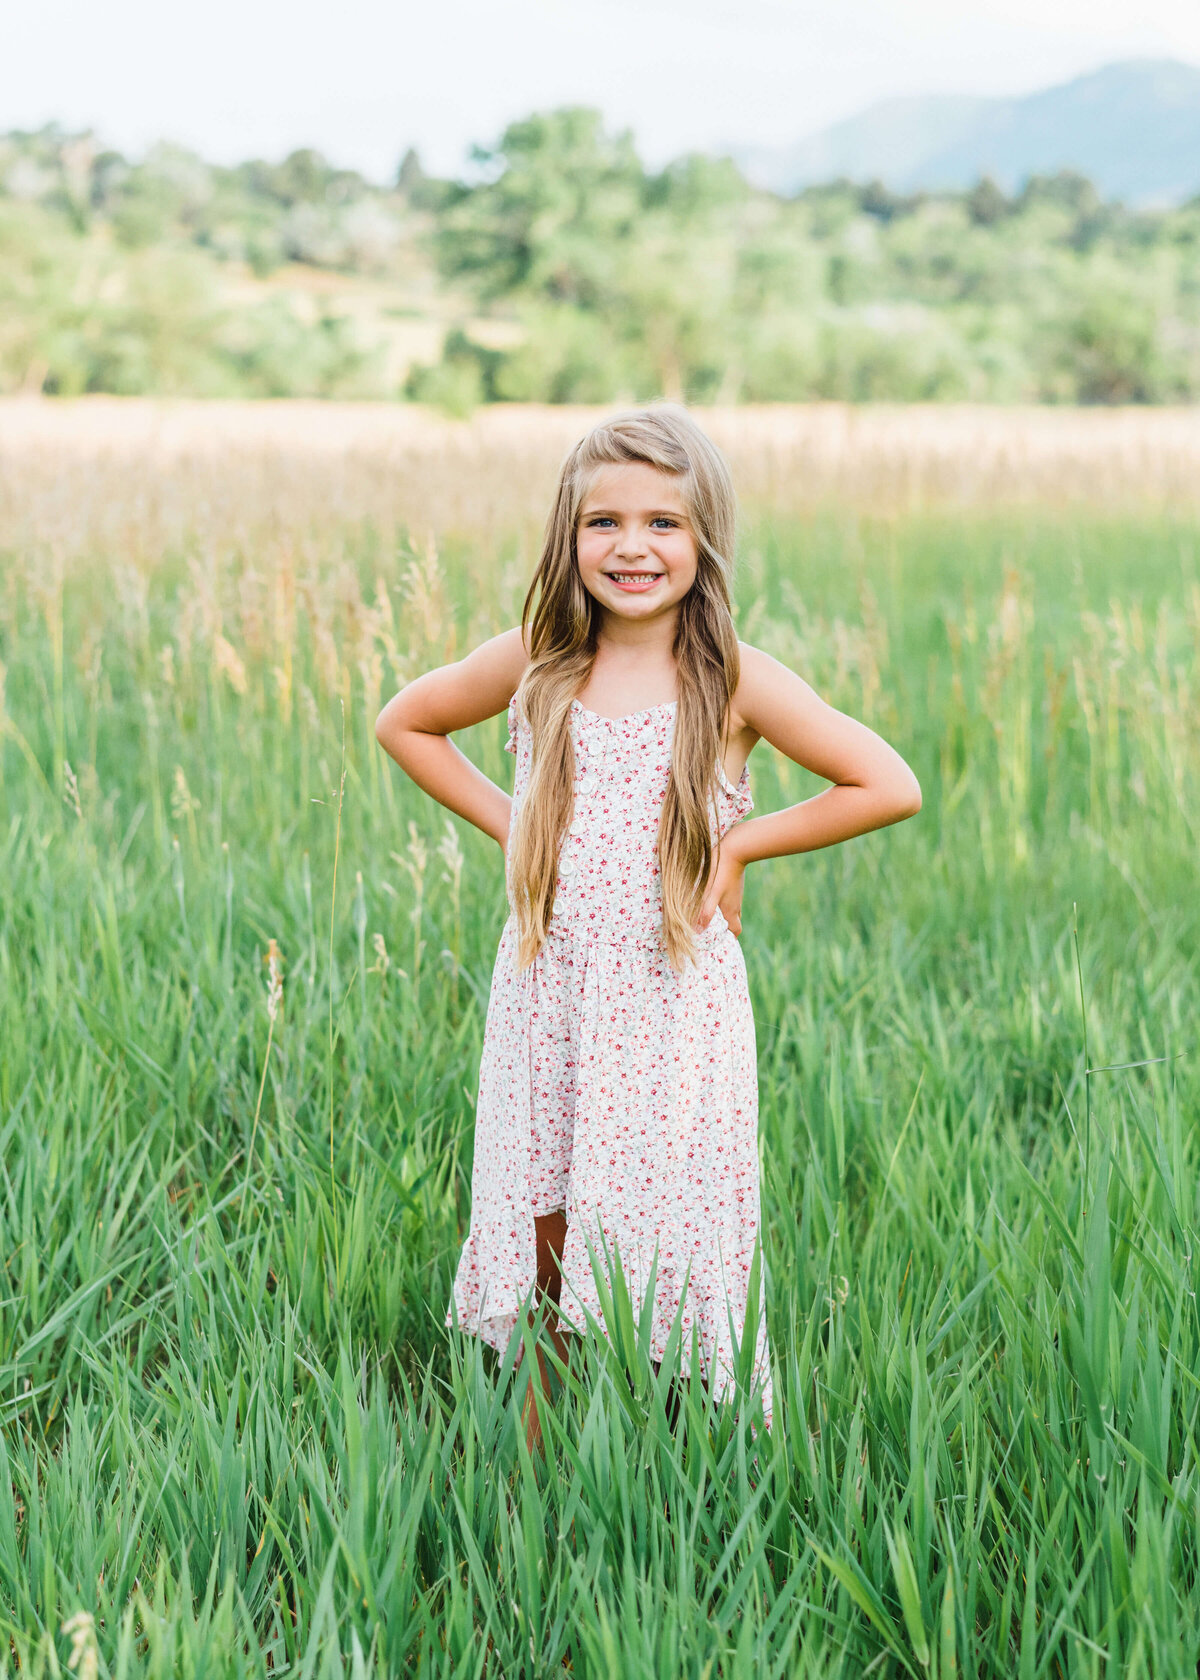 An adorable, blonde young girl stands in a field and smiles at the camera